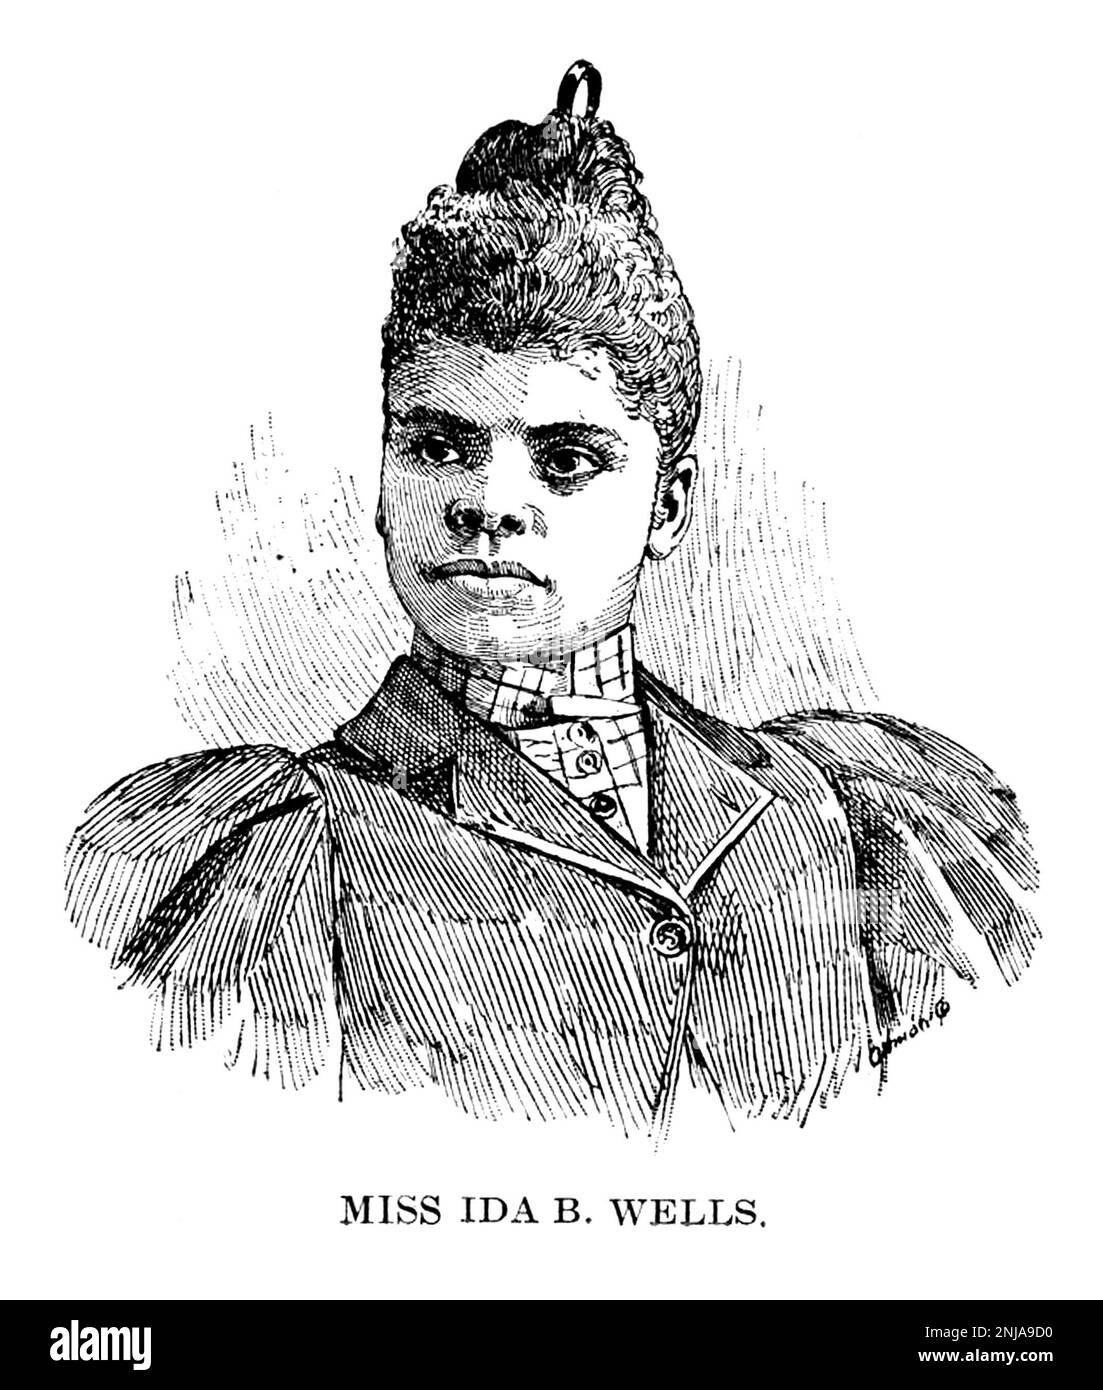 Ida B. Wells, 1862 – 1931, was an American investigative journalist, educator, and early leader in the civil rights movement, vintage illustration from 1894 Stock Photo